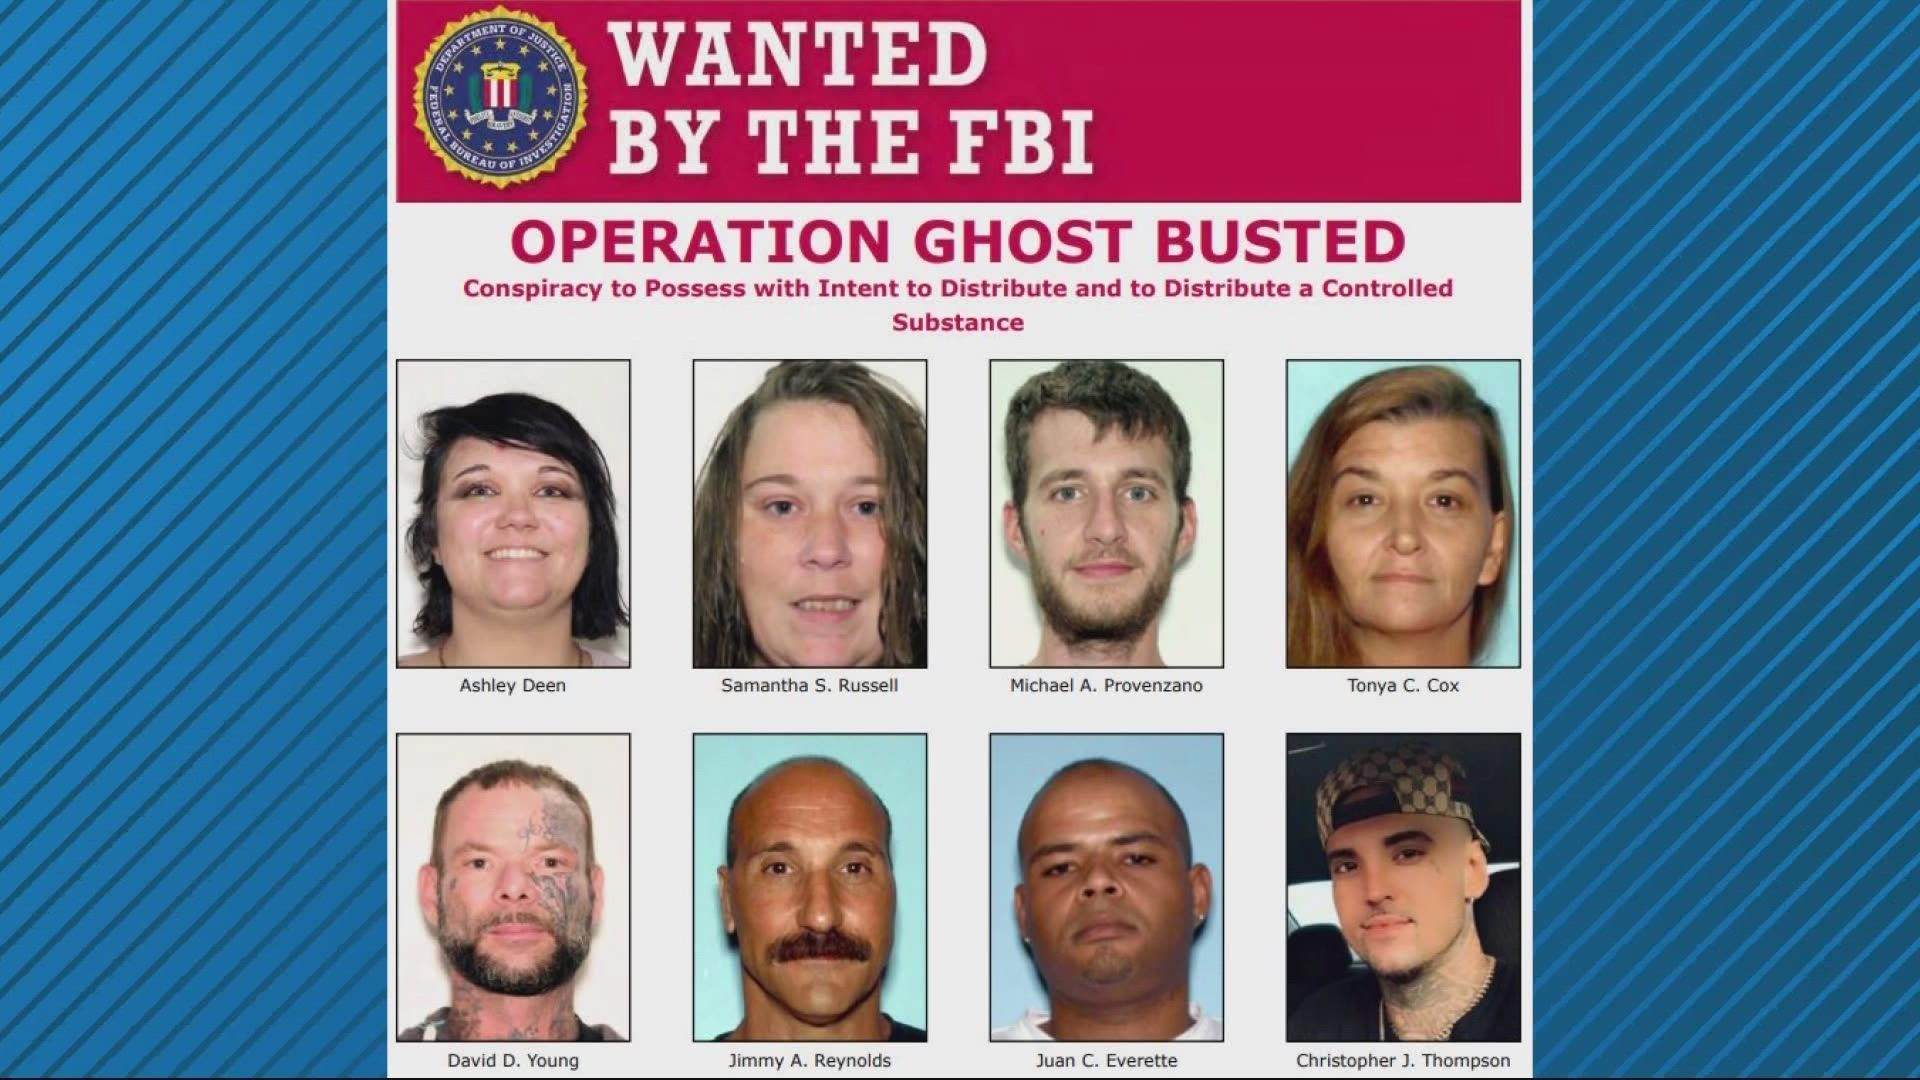 The agency says these people are wanted in connection to a widespread drug operation.